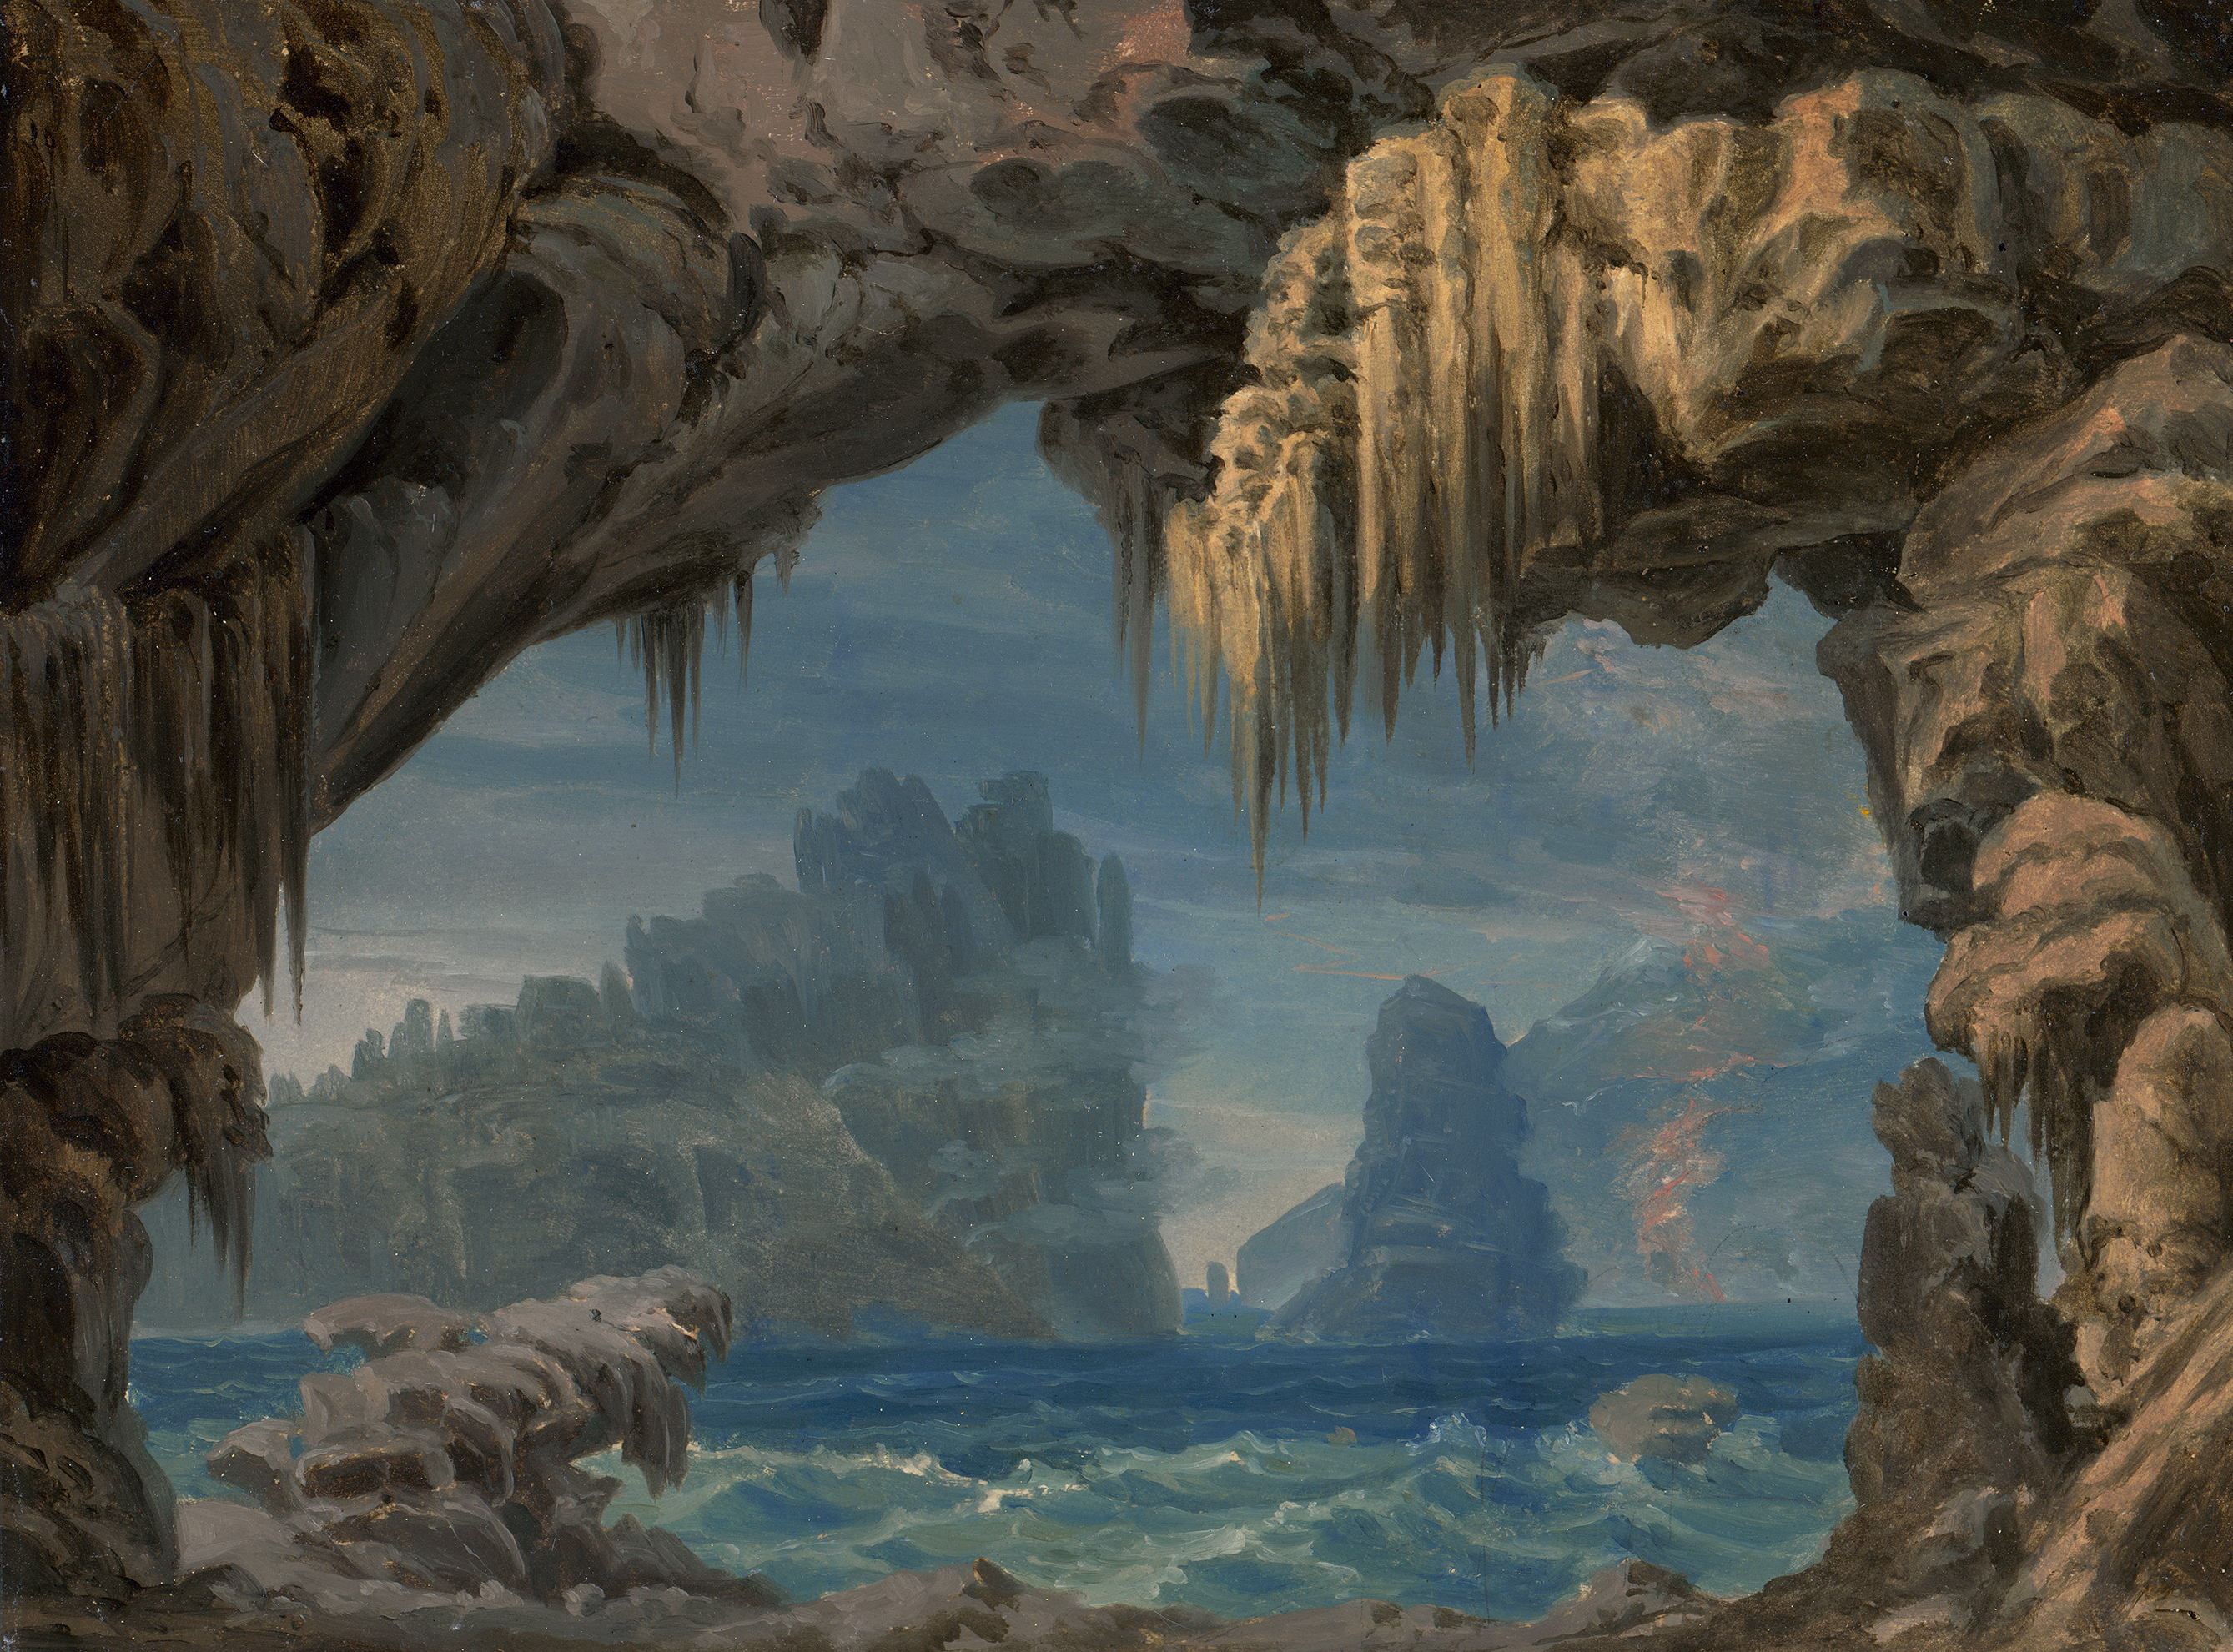 45 Gerst painting View of the Sea from a Picturesque Grotto with an Archipelago of Volcanic Islands